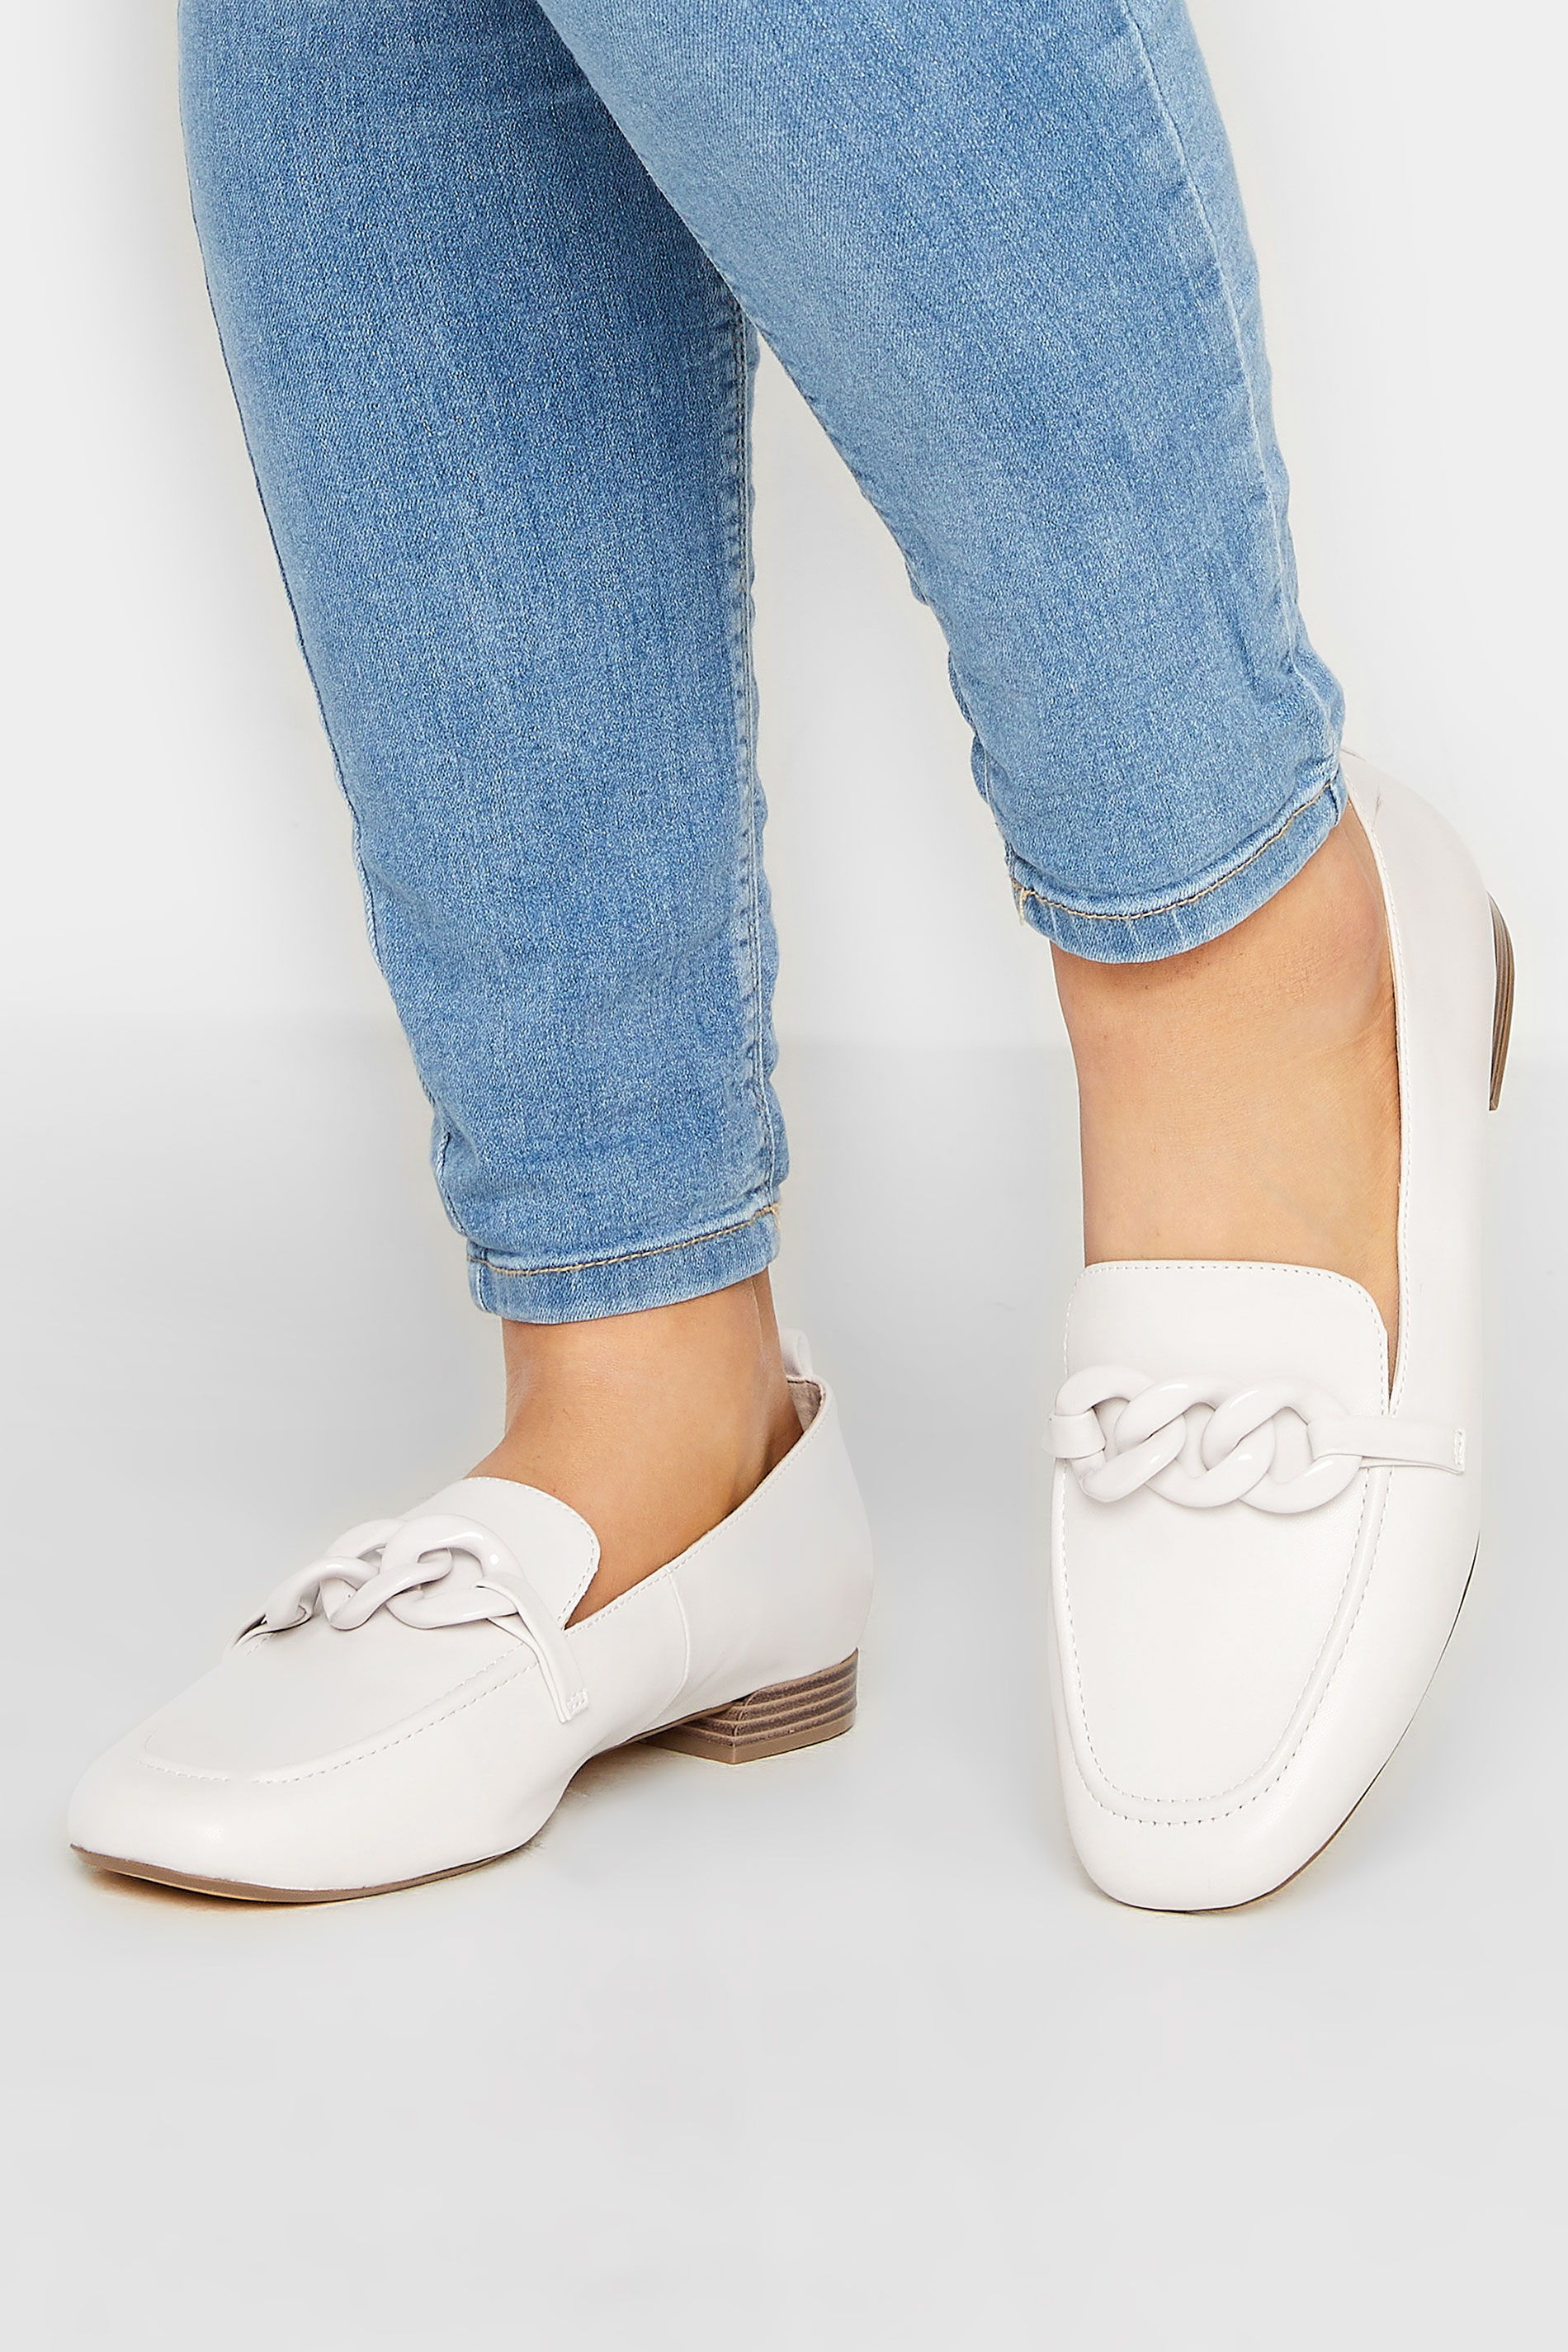 LIMITED COLLECTION Ivory White Chain Loafers In Wide E Fit | Yours Clothing 1